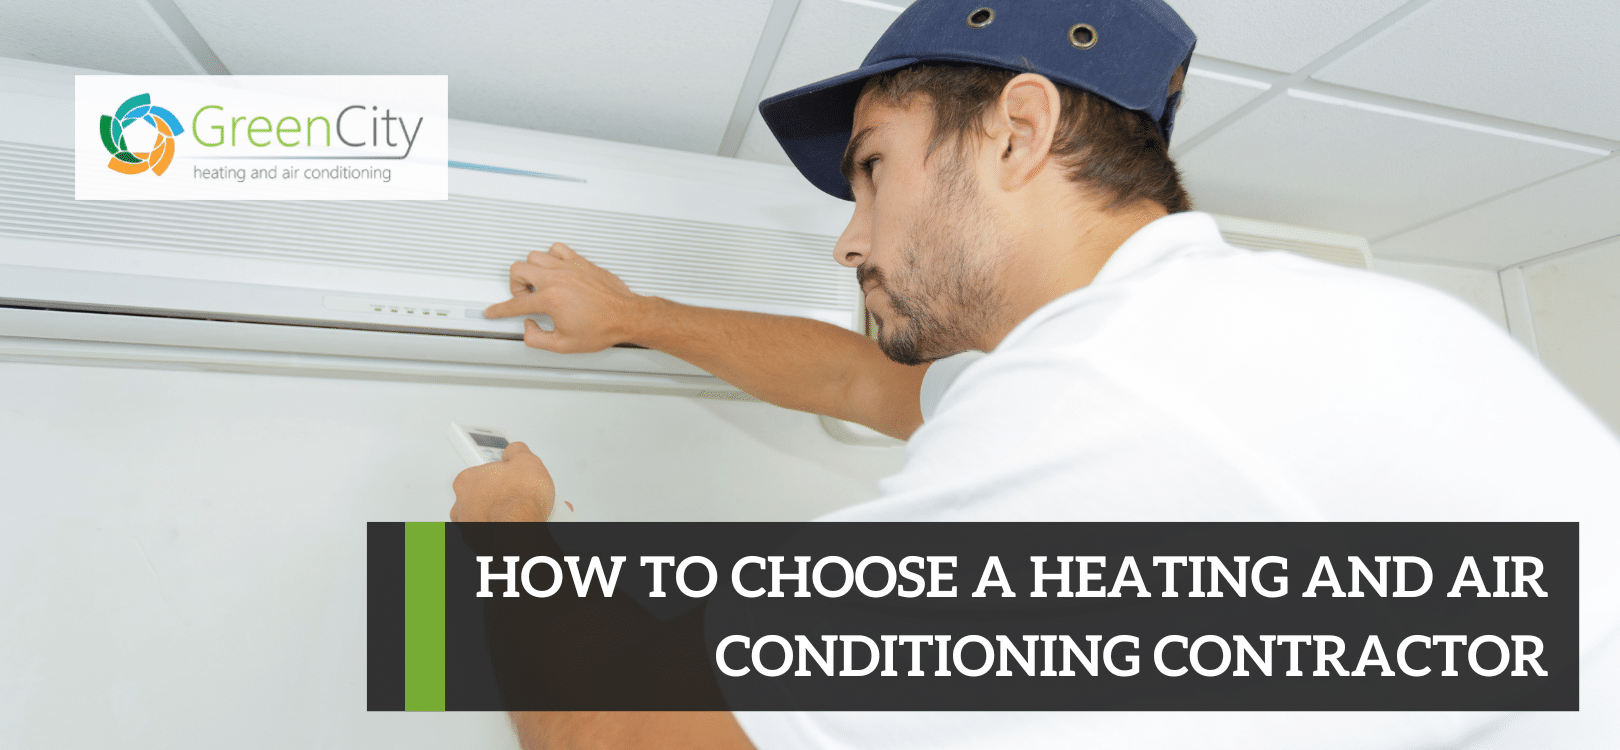 HOW TO CHOOSE A HEATING AND AIR CONDITIONING CONTRACTOR